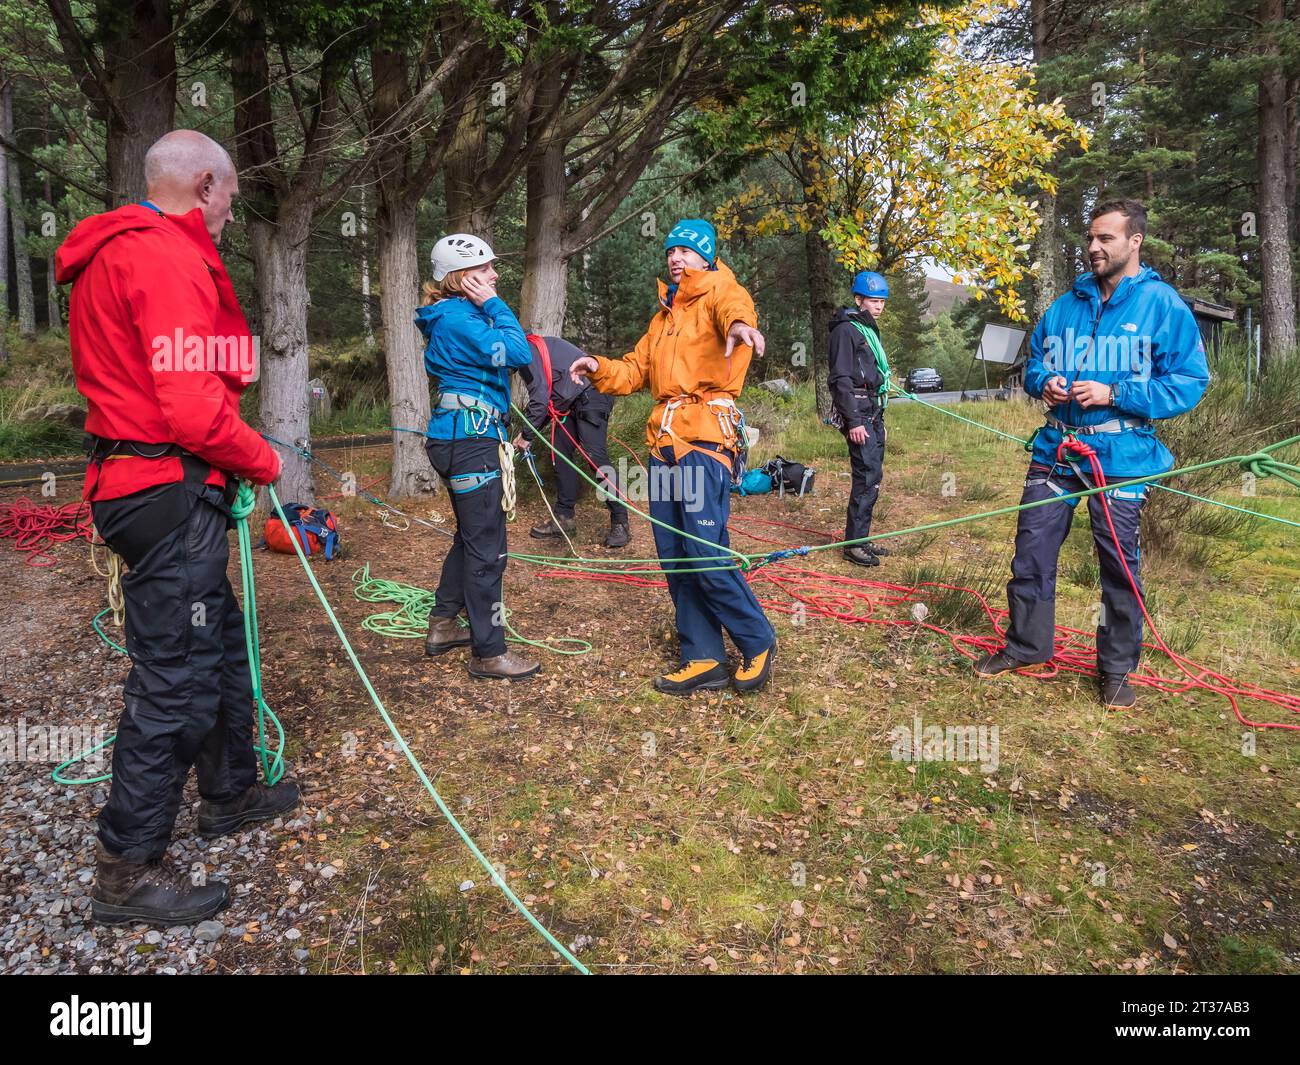 People learning mountaineering rope skills at Glenmore Lodge Outdoor Education Centre located in the Cairngorm National Park near Aviemore Stock Photo